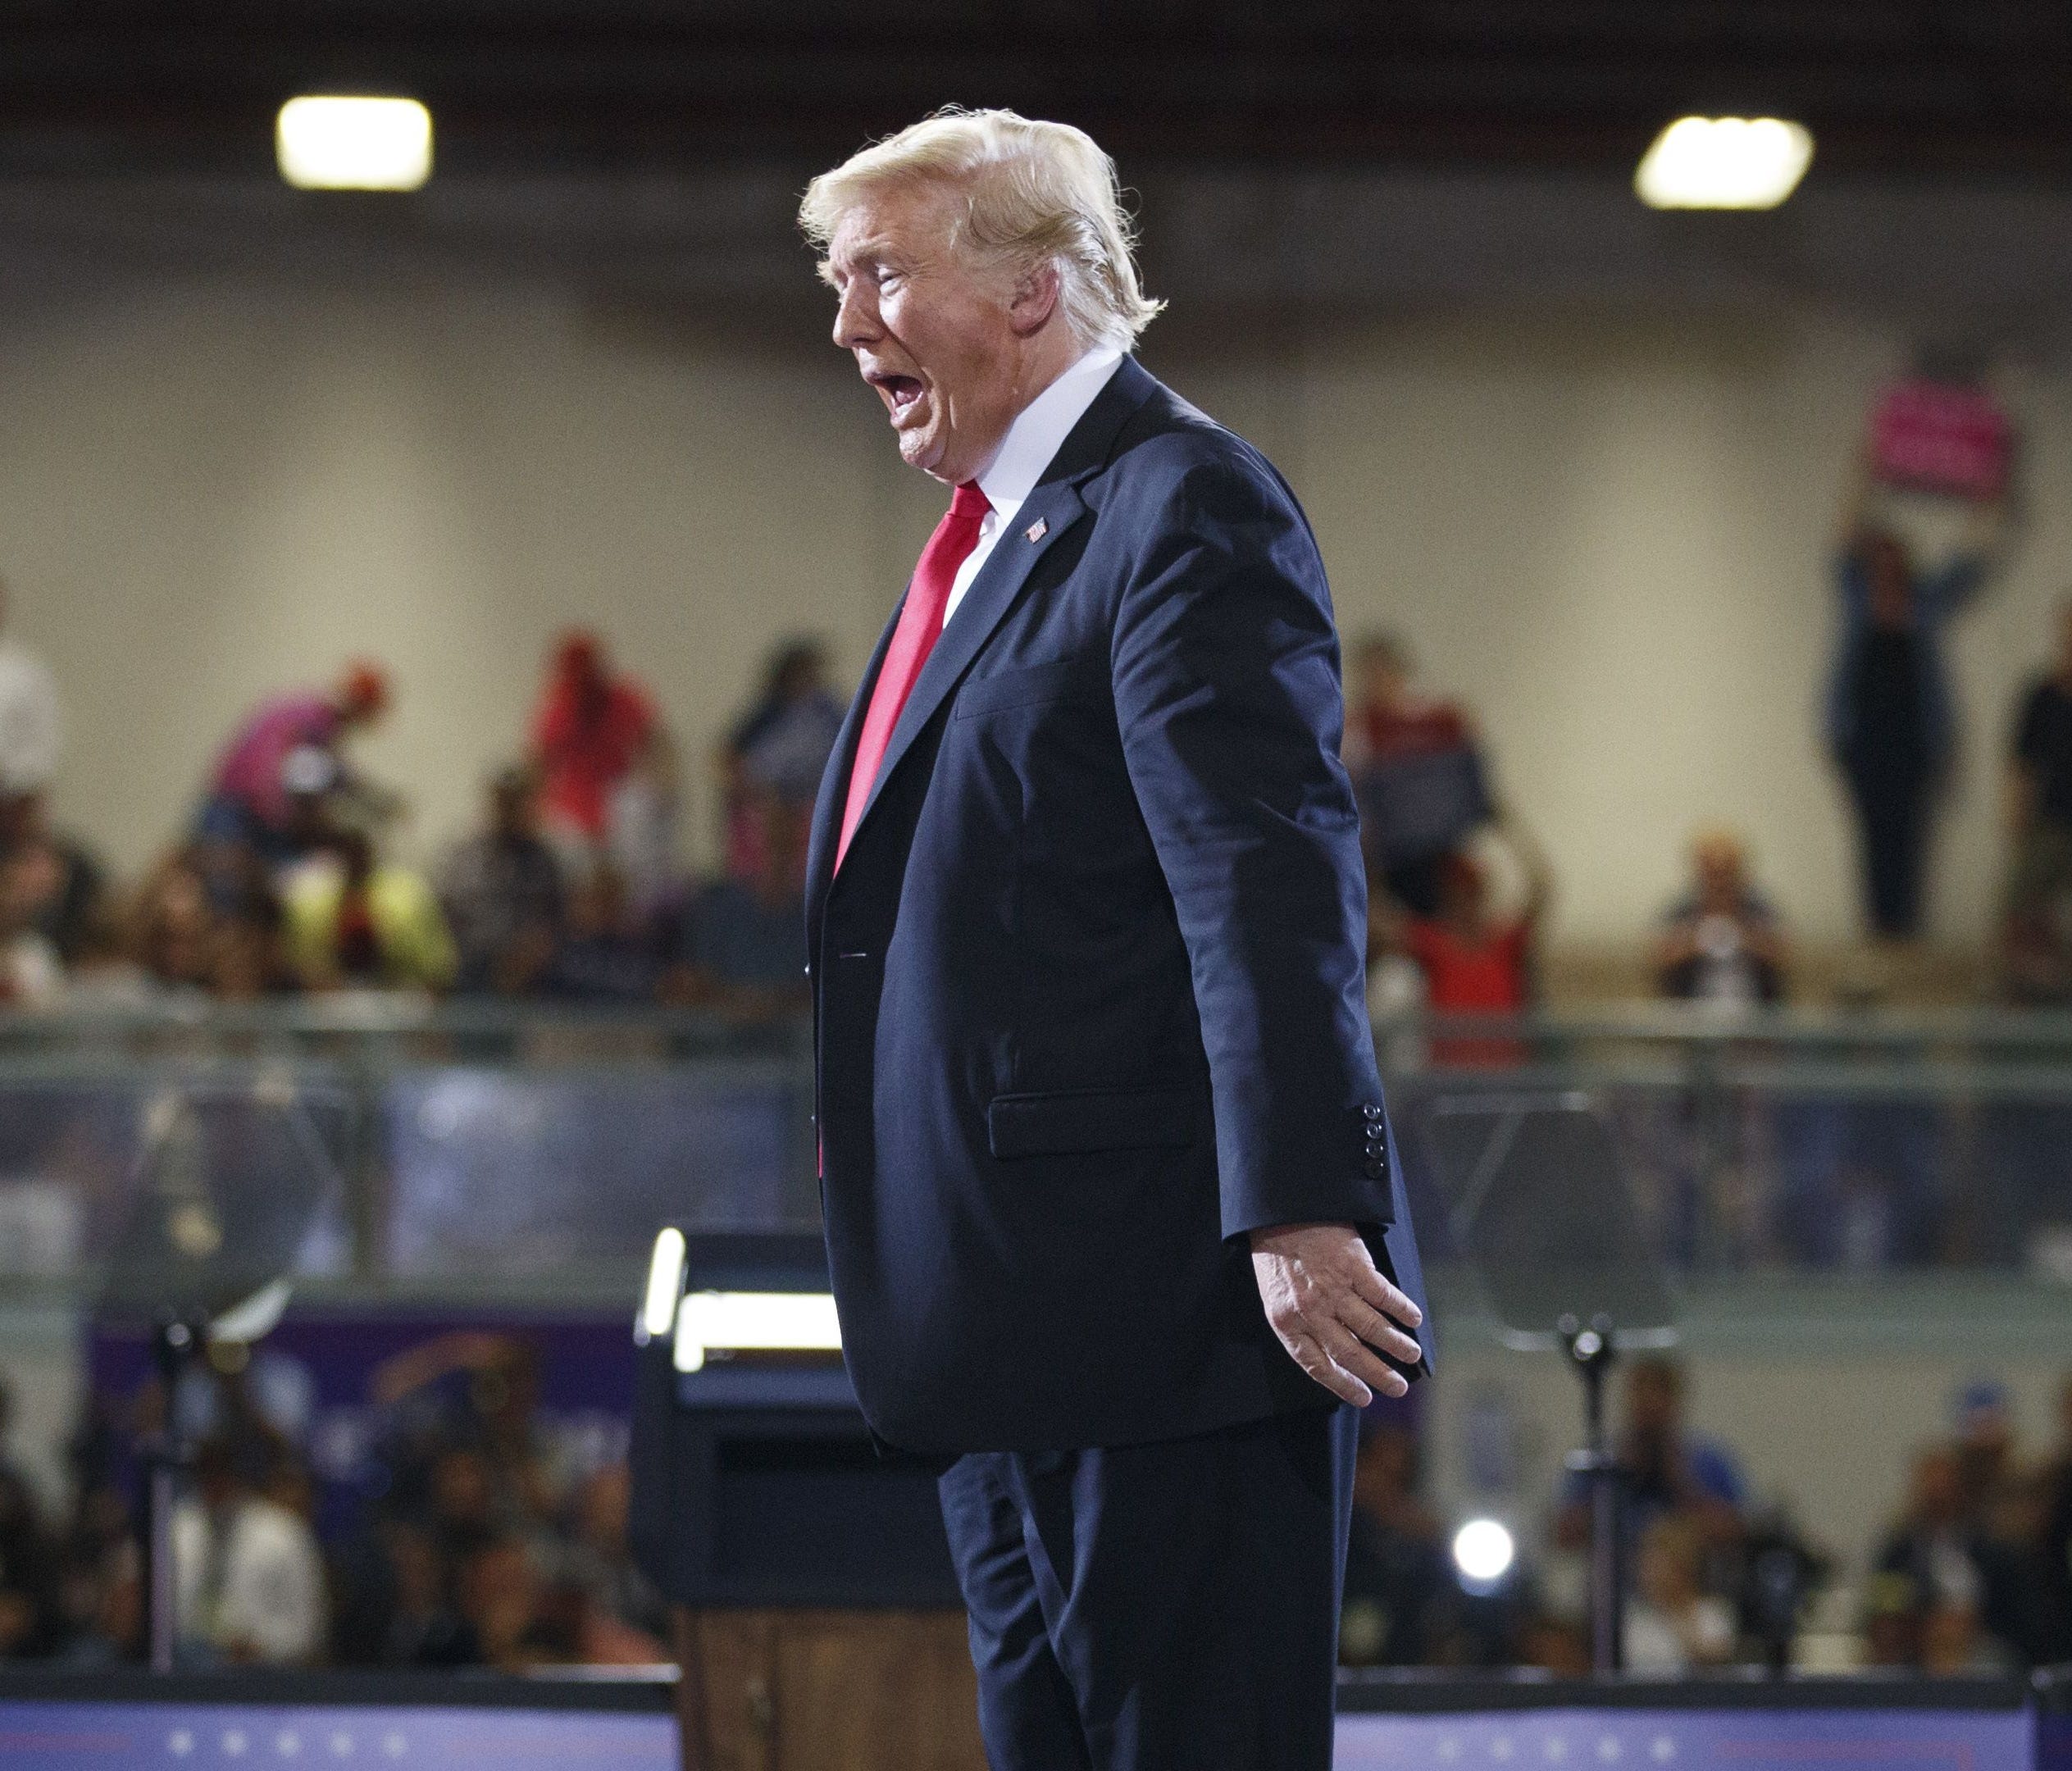 President Donald Trump took a shot at the NFL's revised national anthem policy Thursday at a rally in Great Falls, Mont.